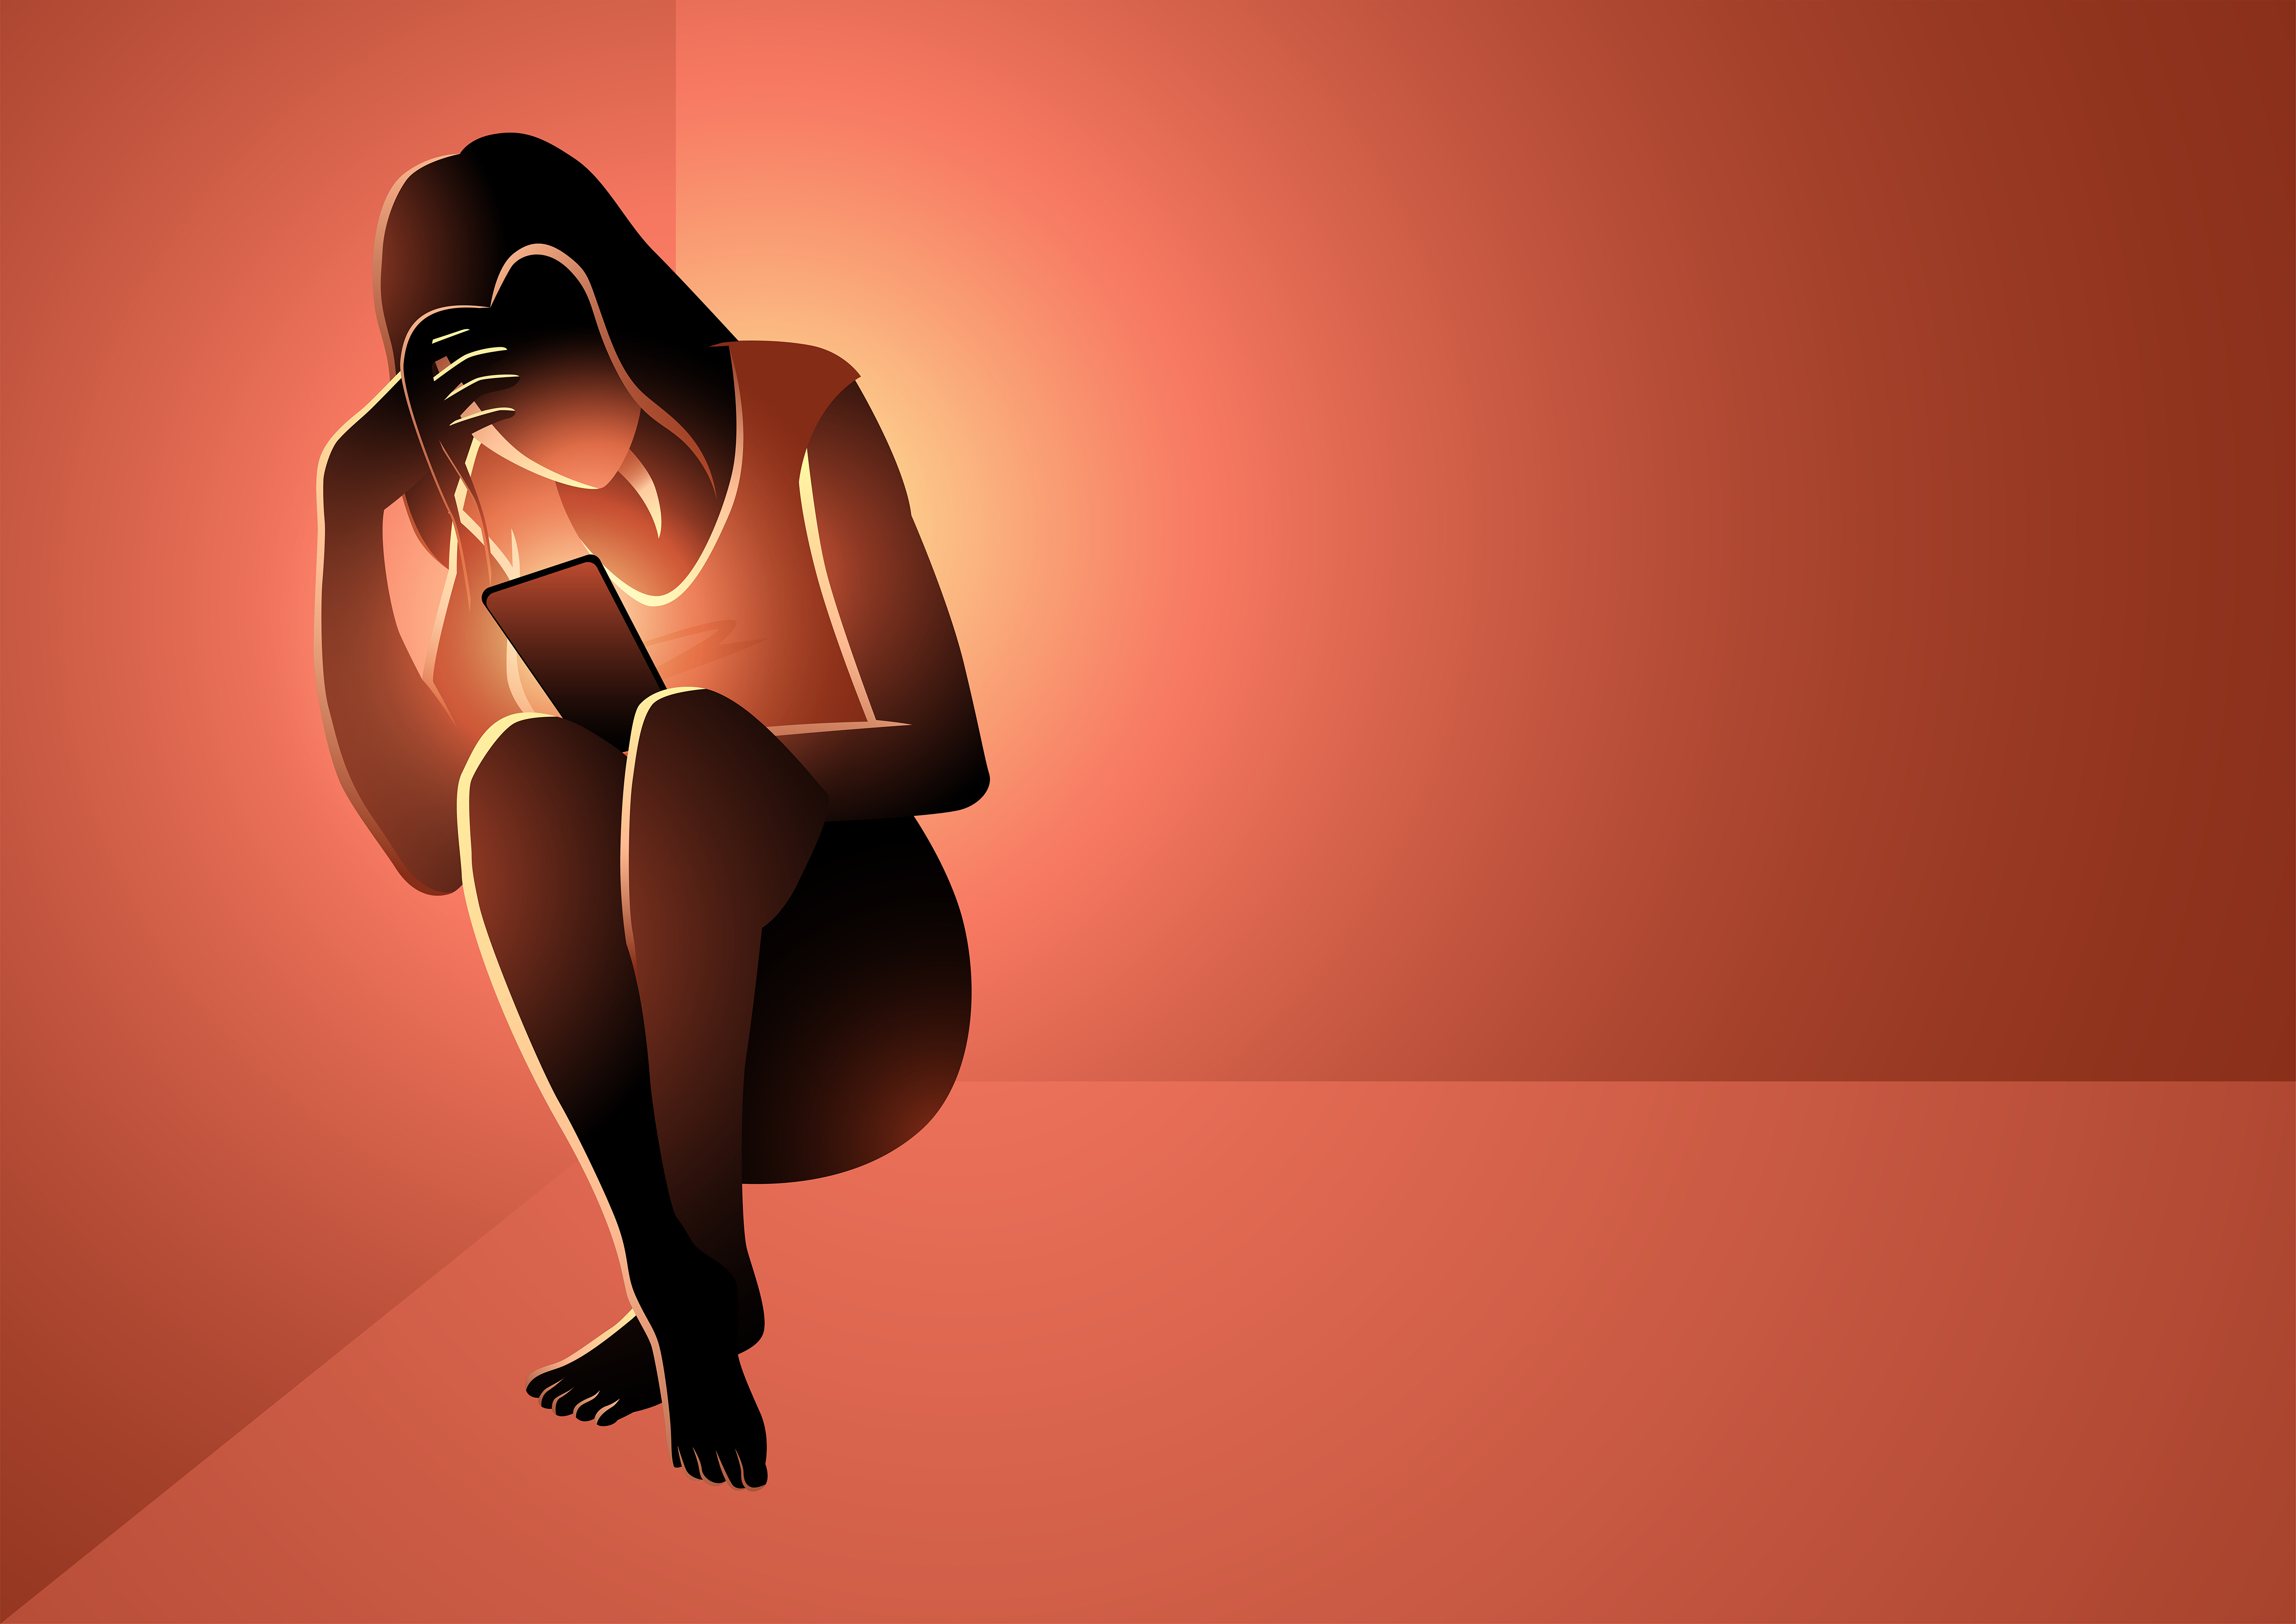 Illustration of a woman sitting in a corner, looking at a smartphone.